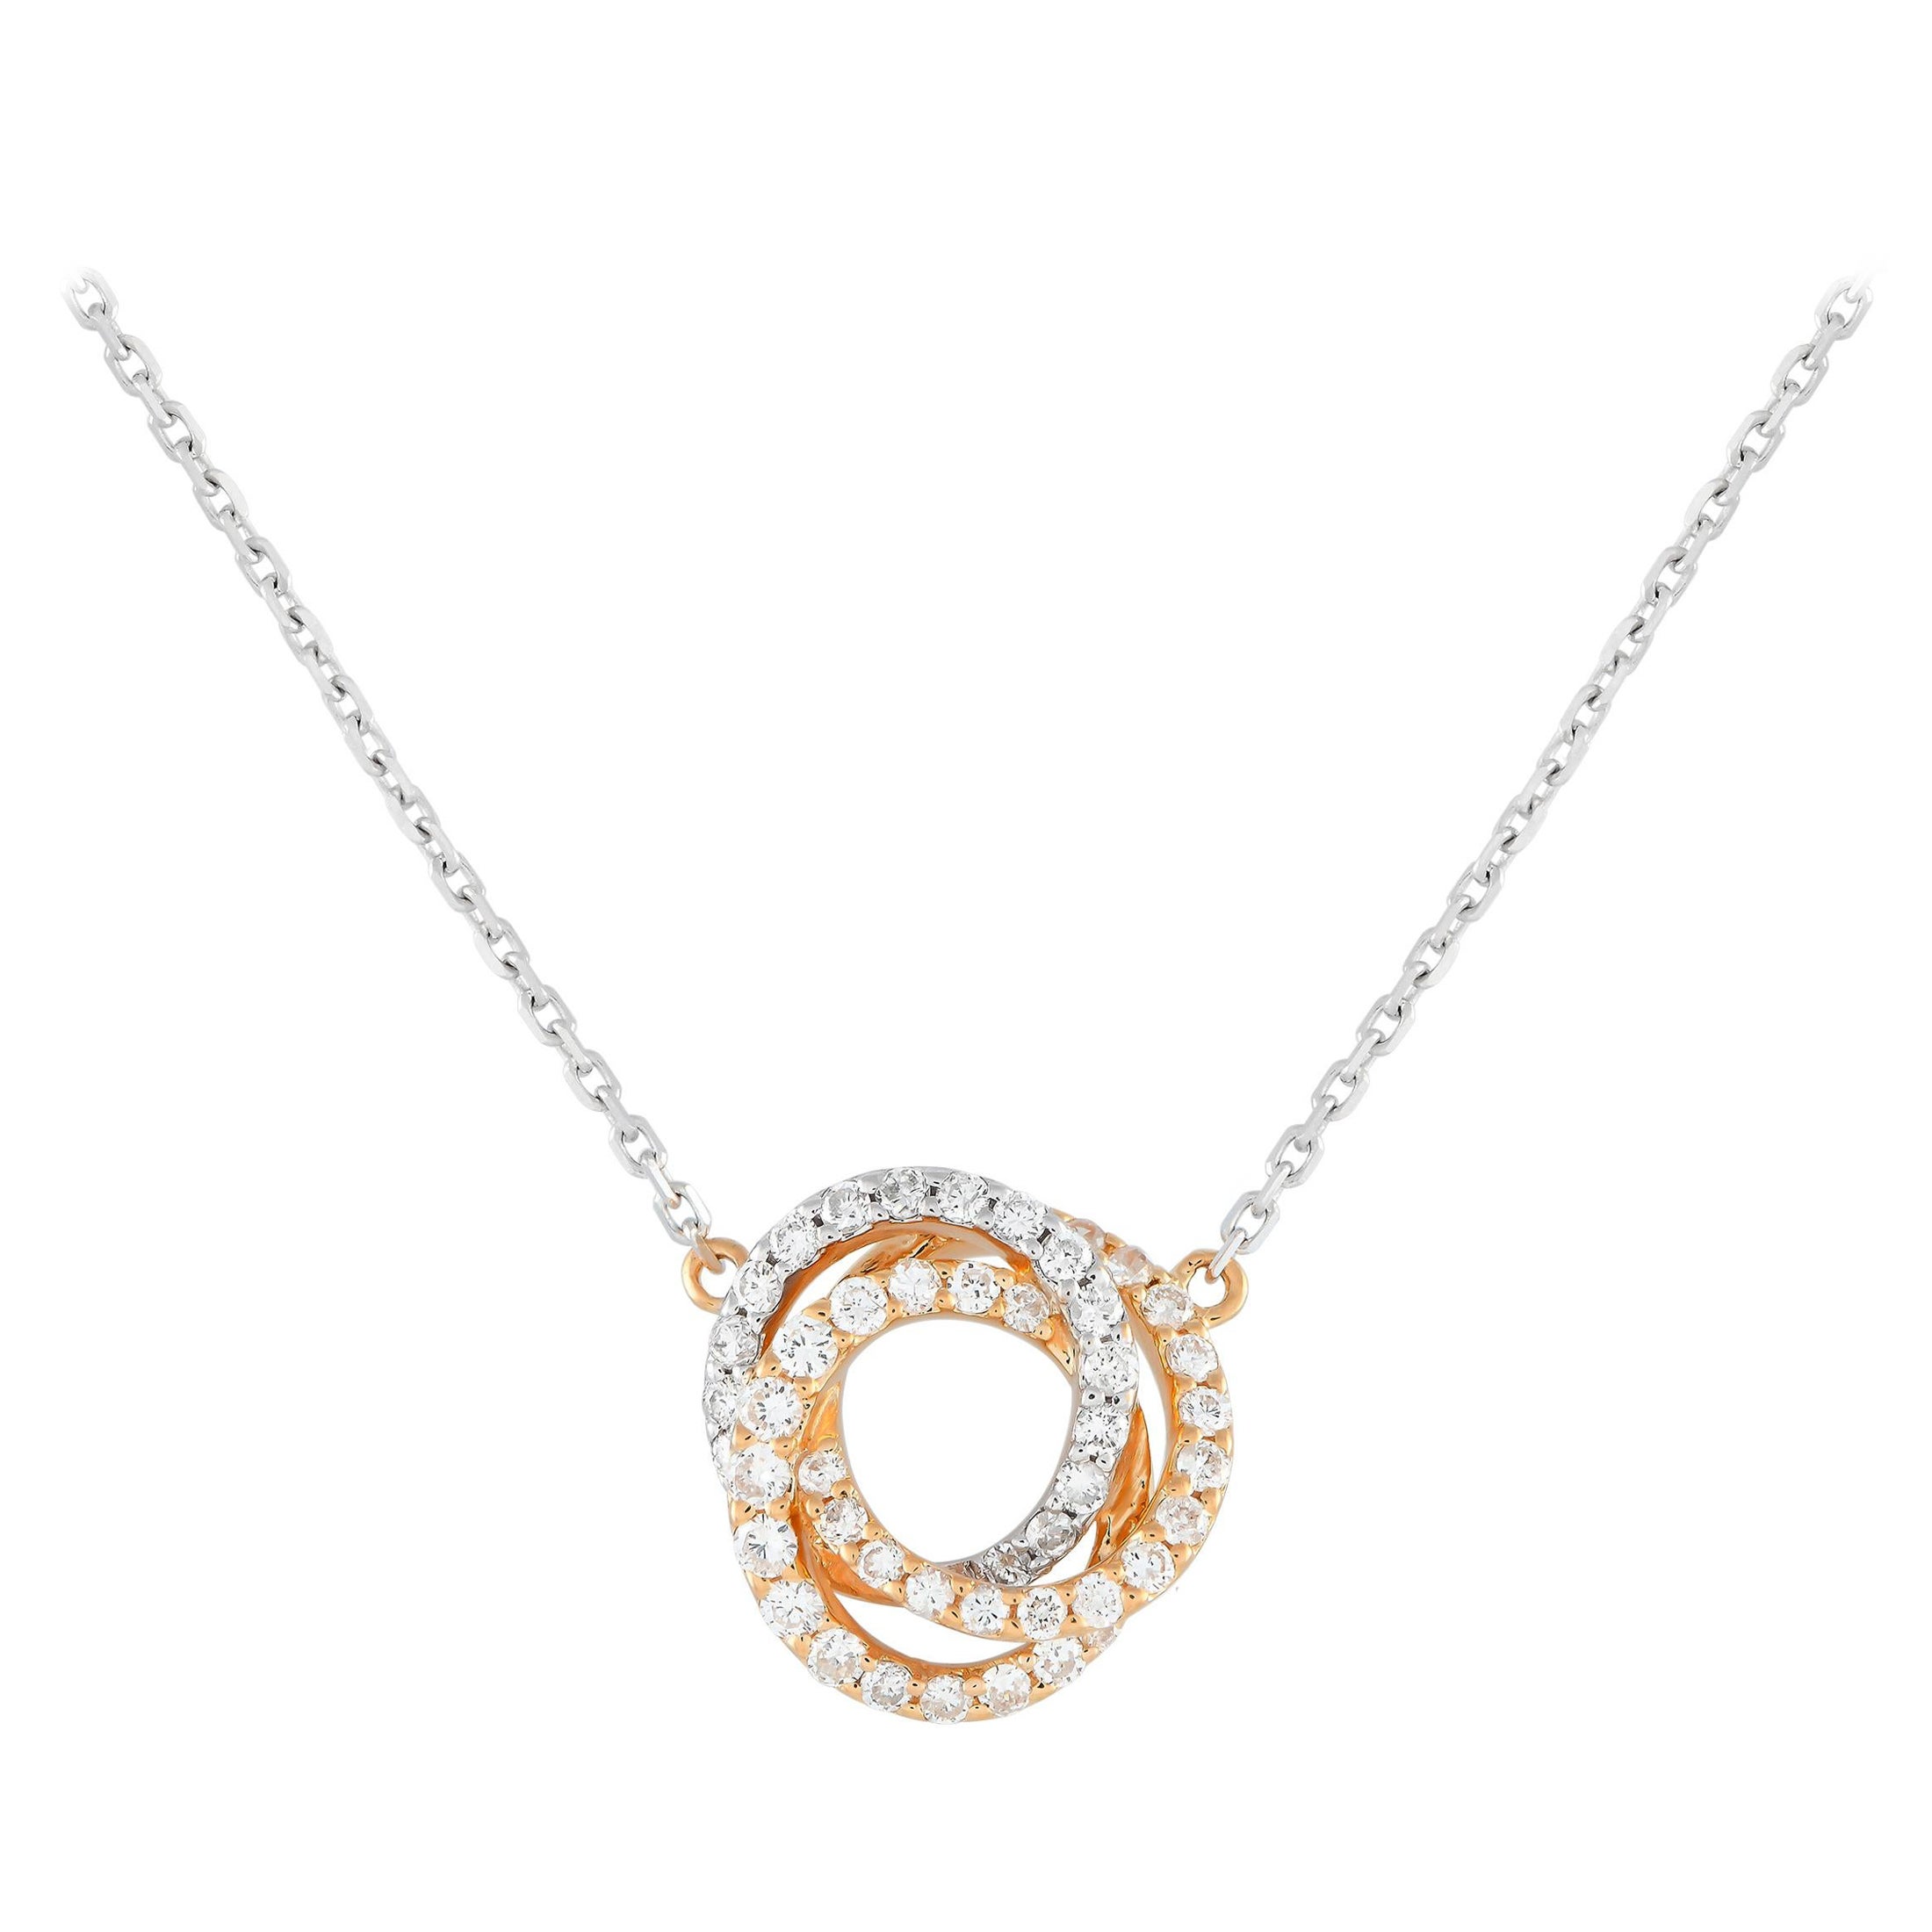 18K White and Rose Gold 0.50ct Diamond Triple Ring Necklace ANK-13200-TRI